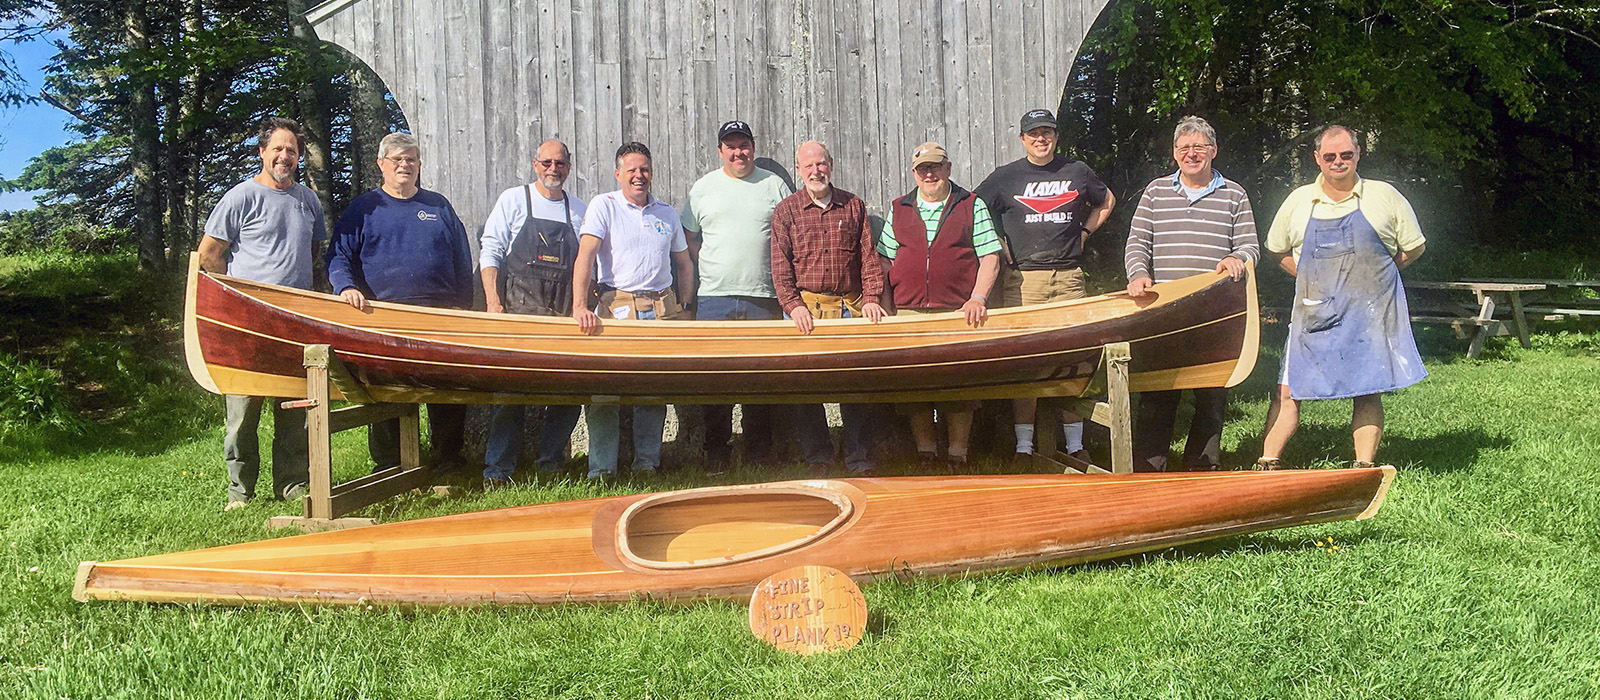 Fine strip planked boats class photo